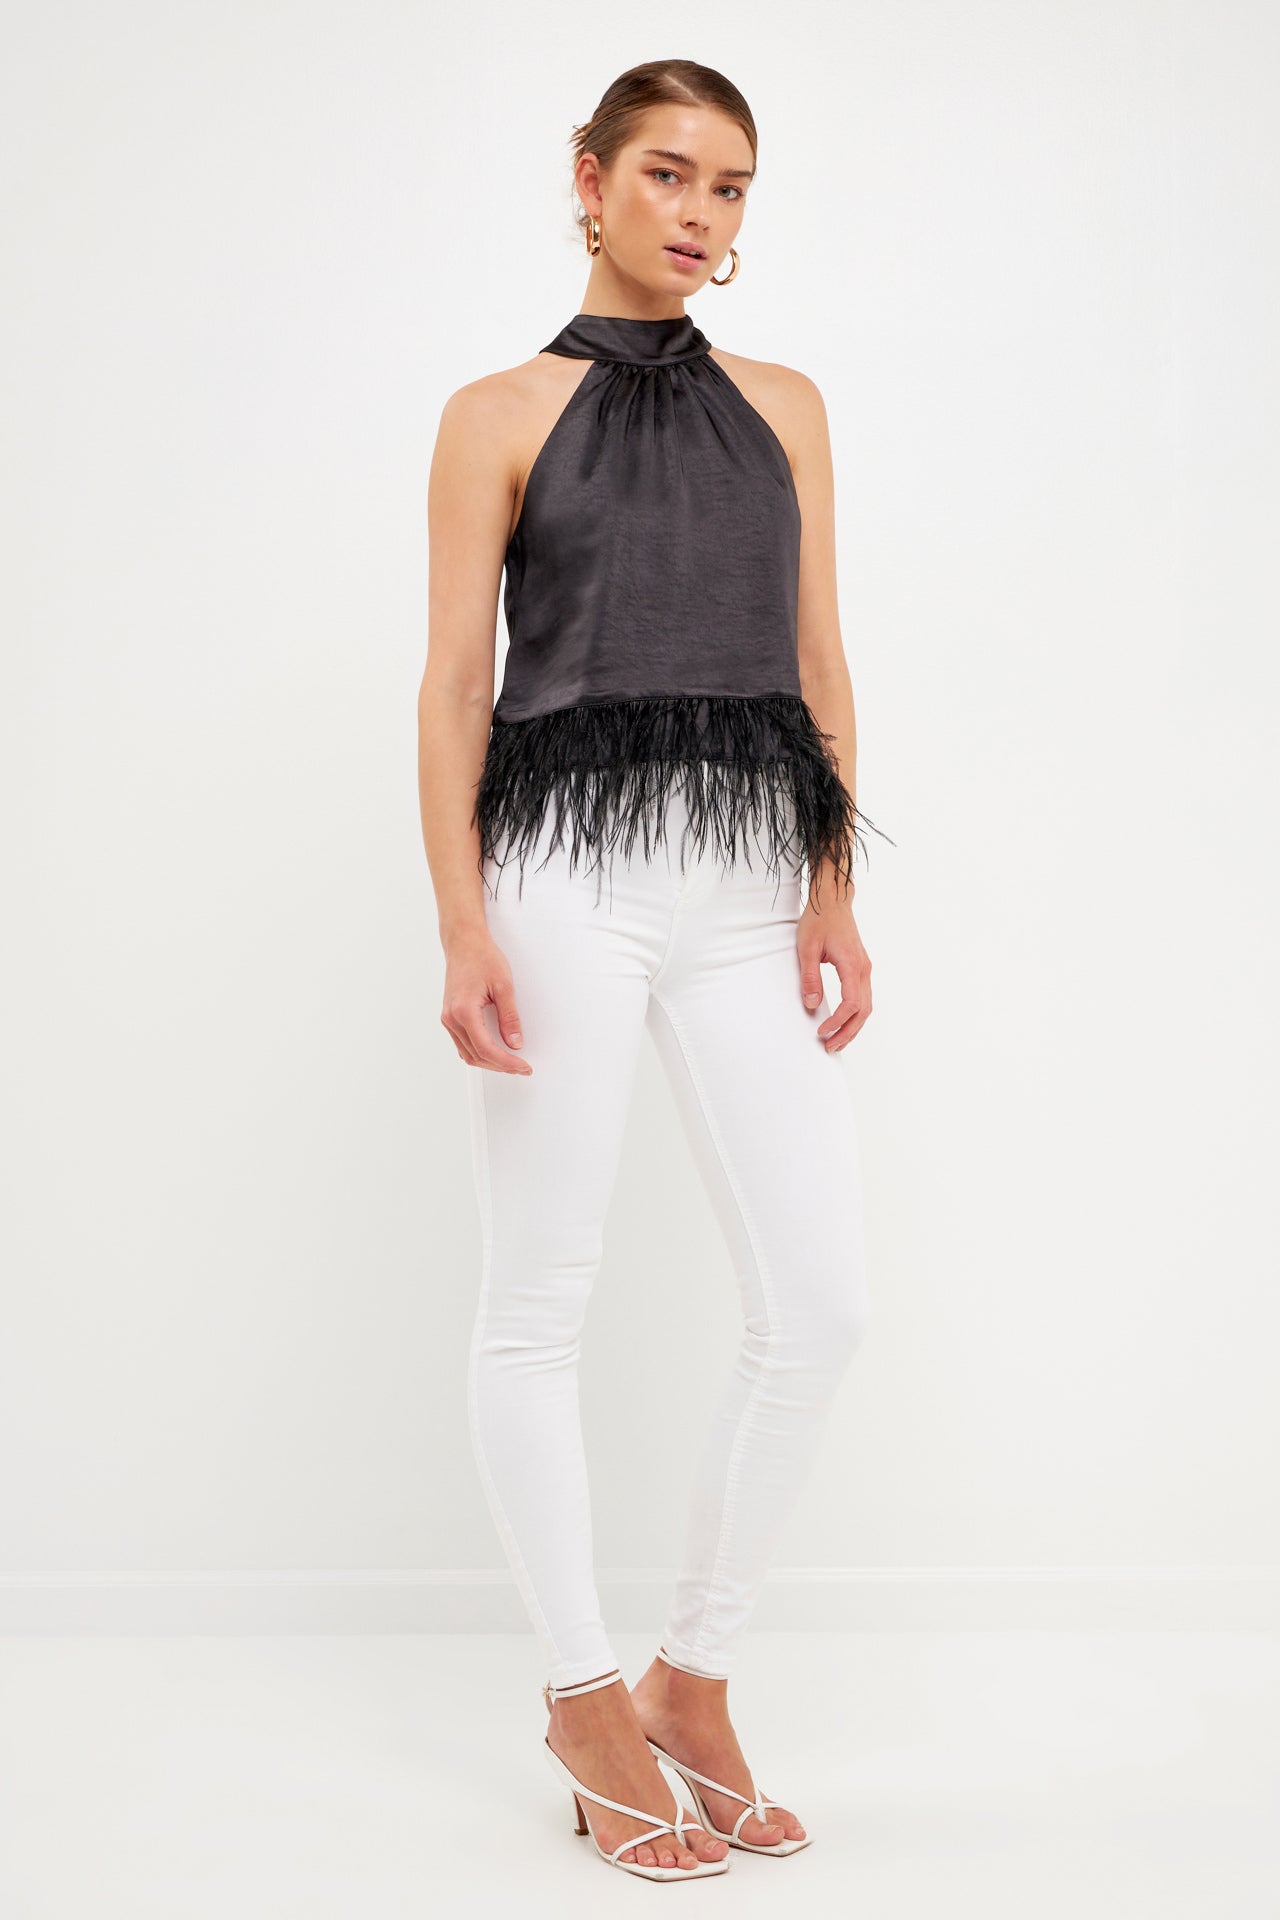 ENDLESS ROSE - Feather Trim Top - TOPS available at Objectrare